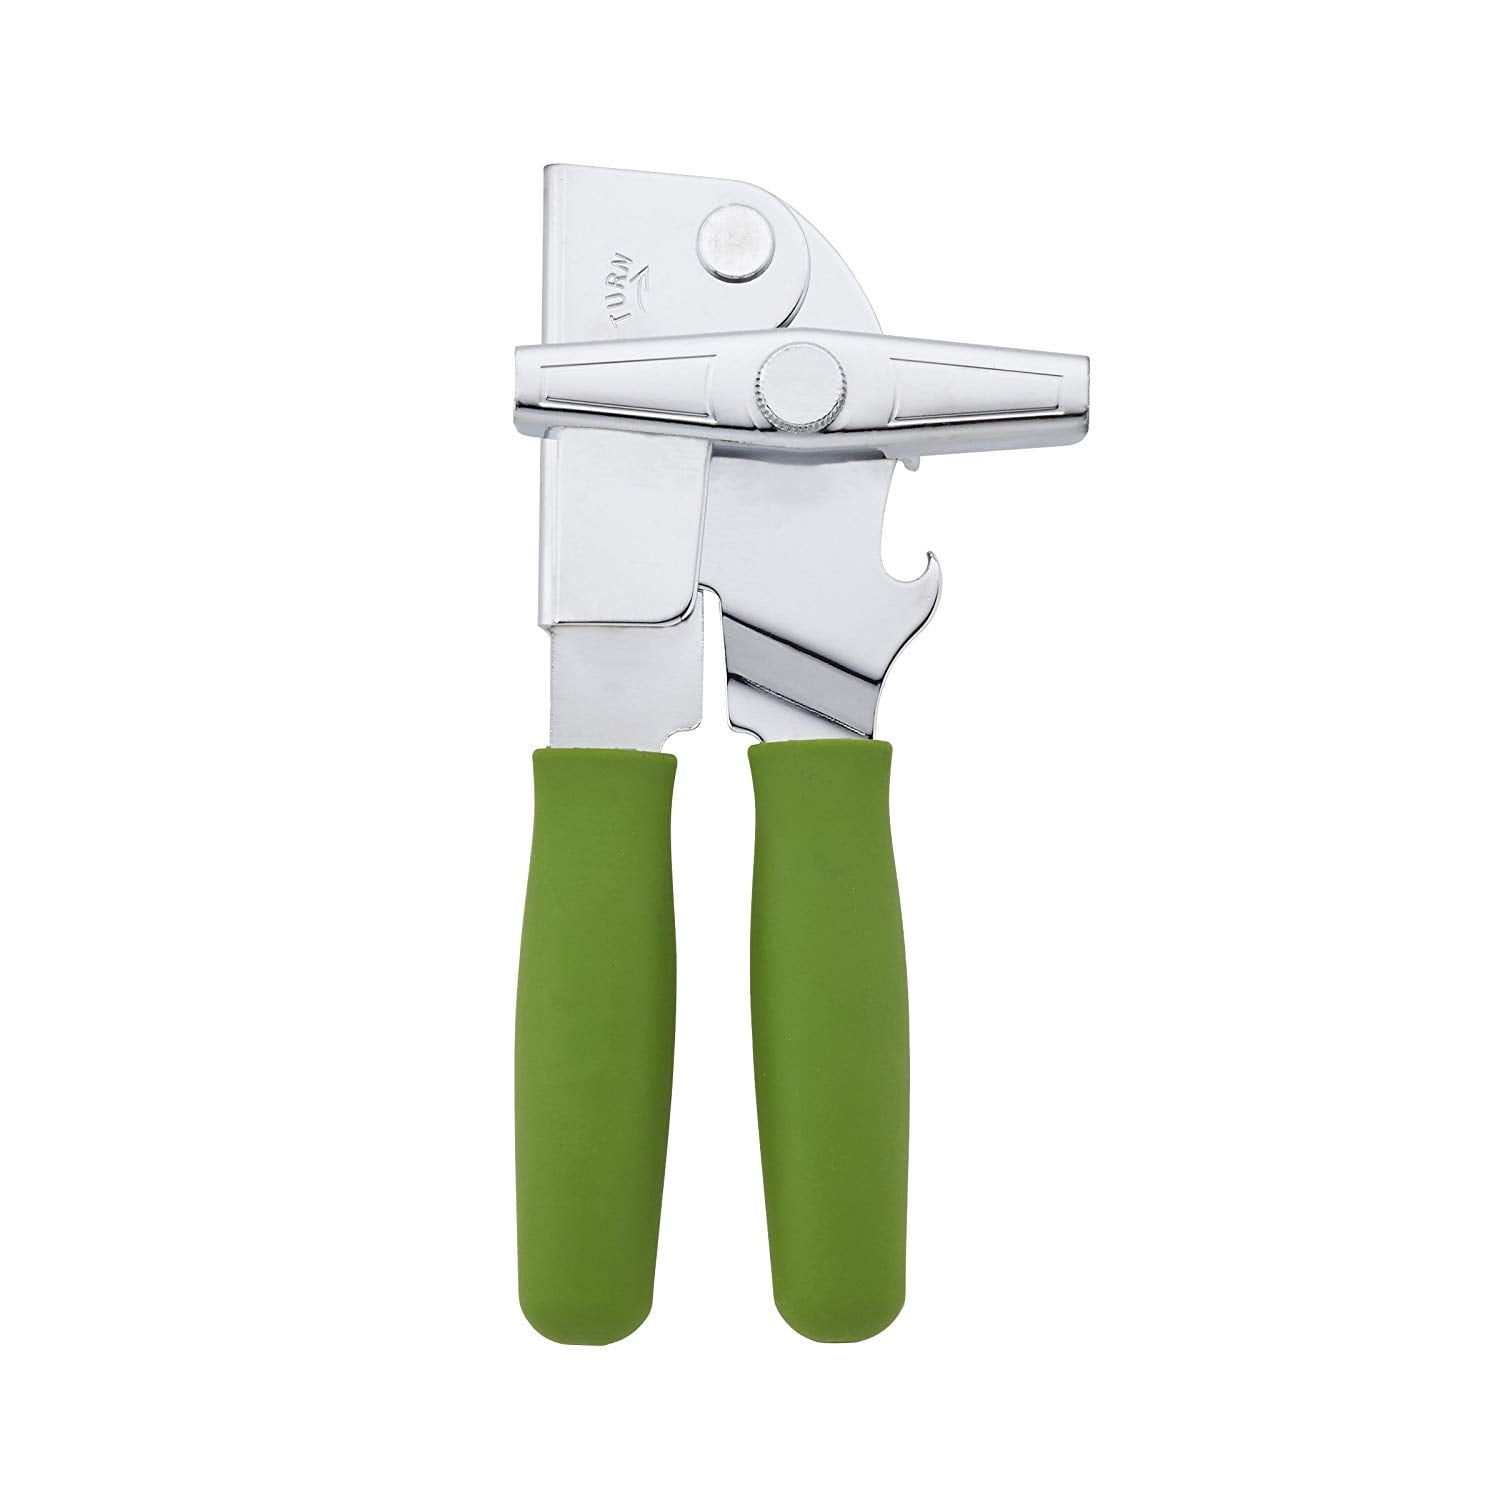 VEVOR Commercial Can Opener, 23.2/59cm Long, Manual Table Can Opener for  Up to 15.7/40cm Tall, Fixed with Clamp or Screws, Ergonomic Swing Handle 